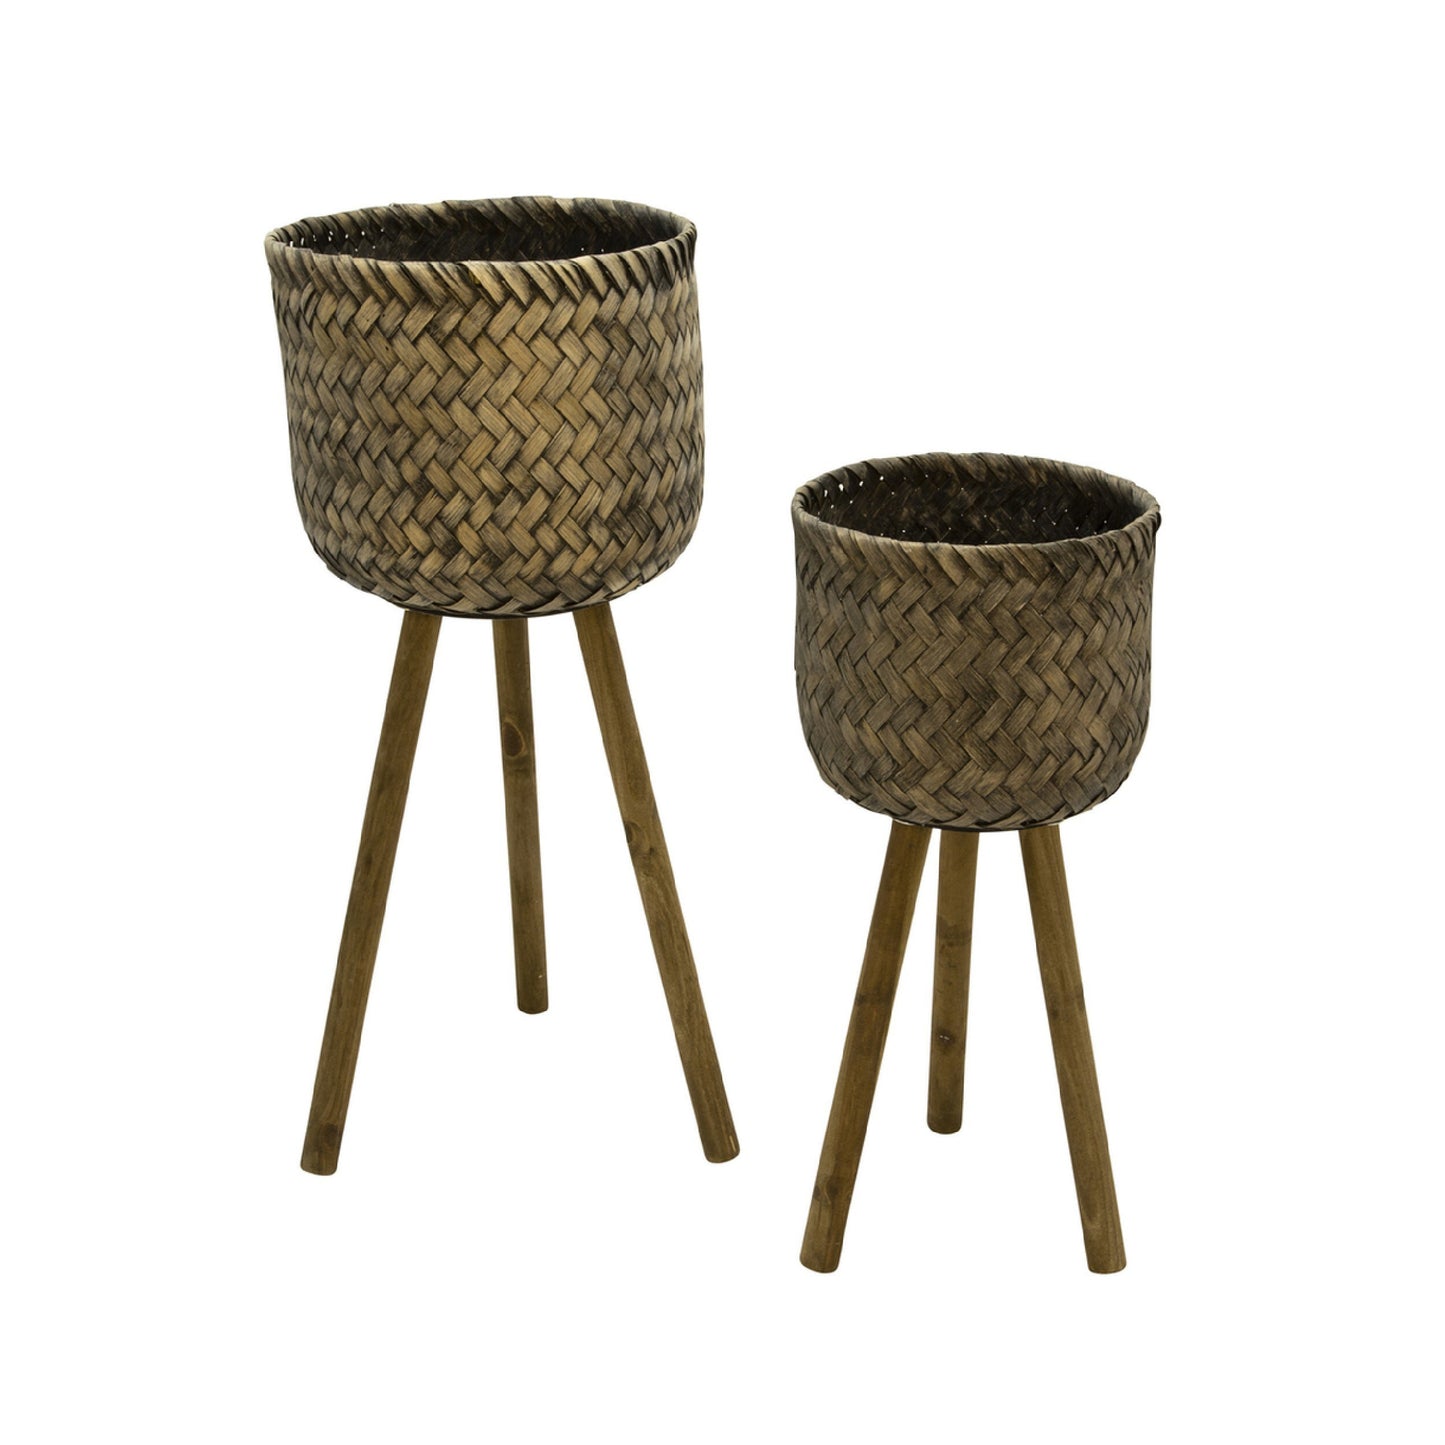 Basket Shape Bamboo Planters on Flared Wooden Stand, Rustic Brown, Set Of Two